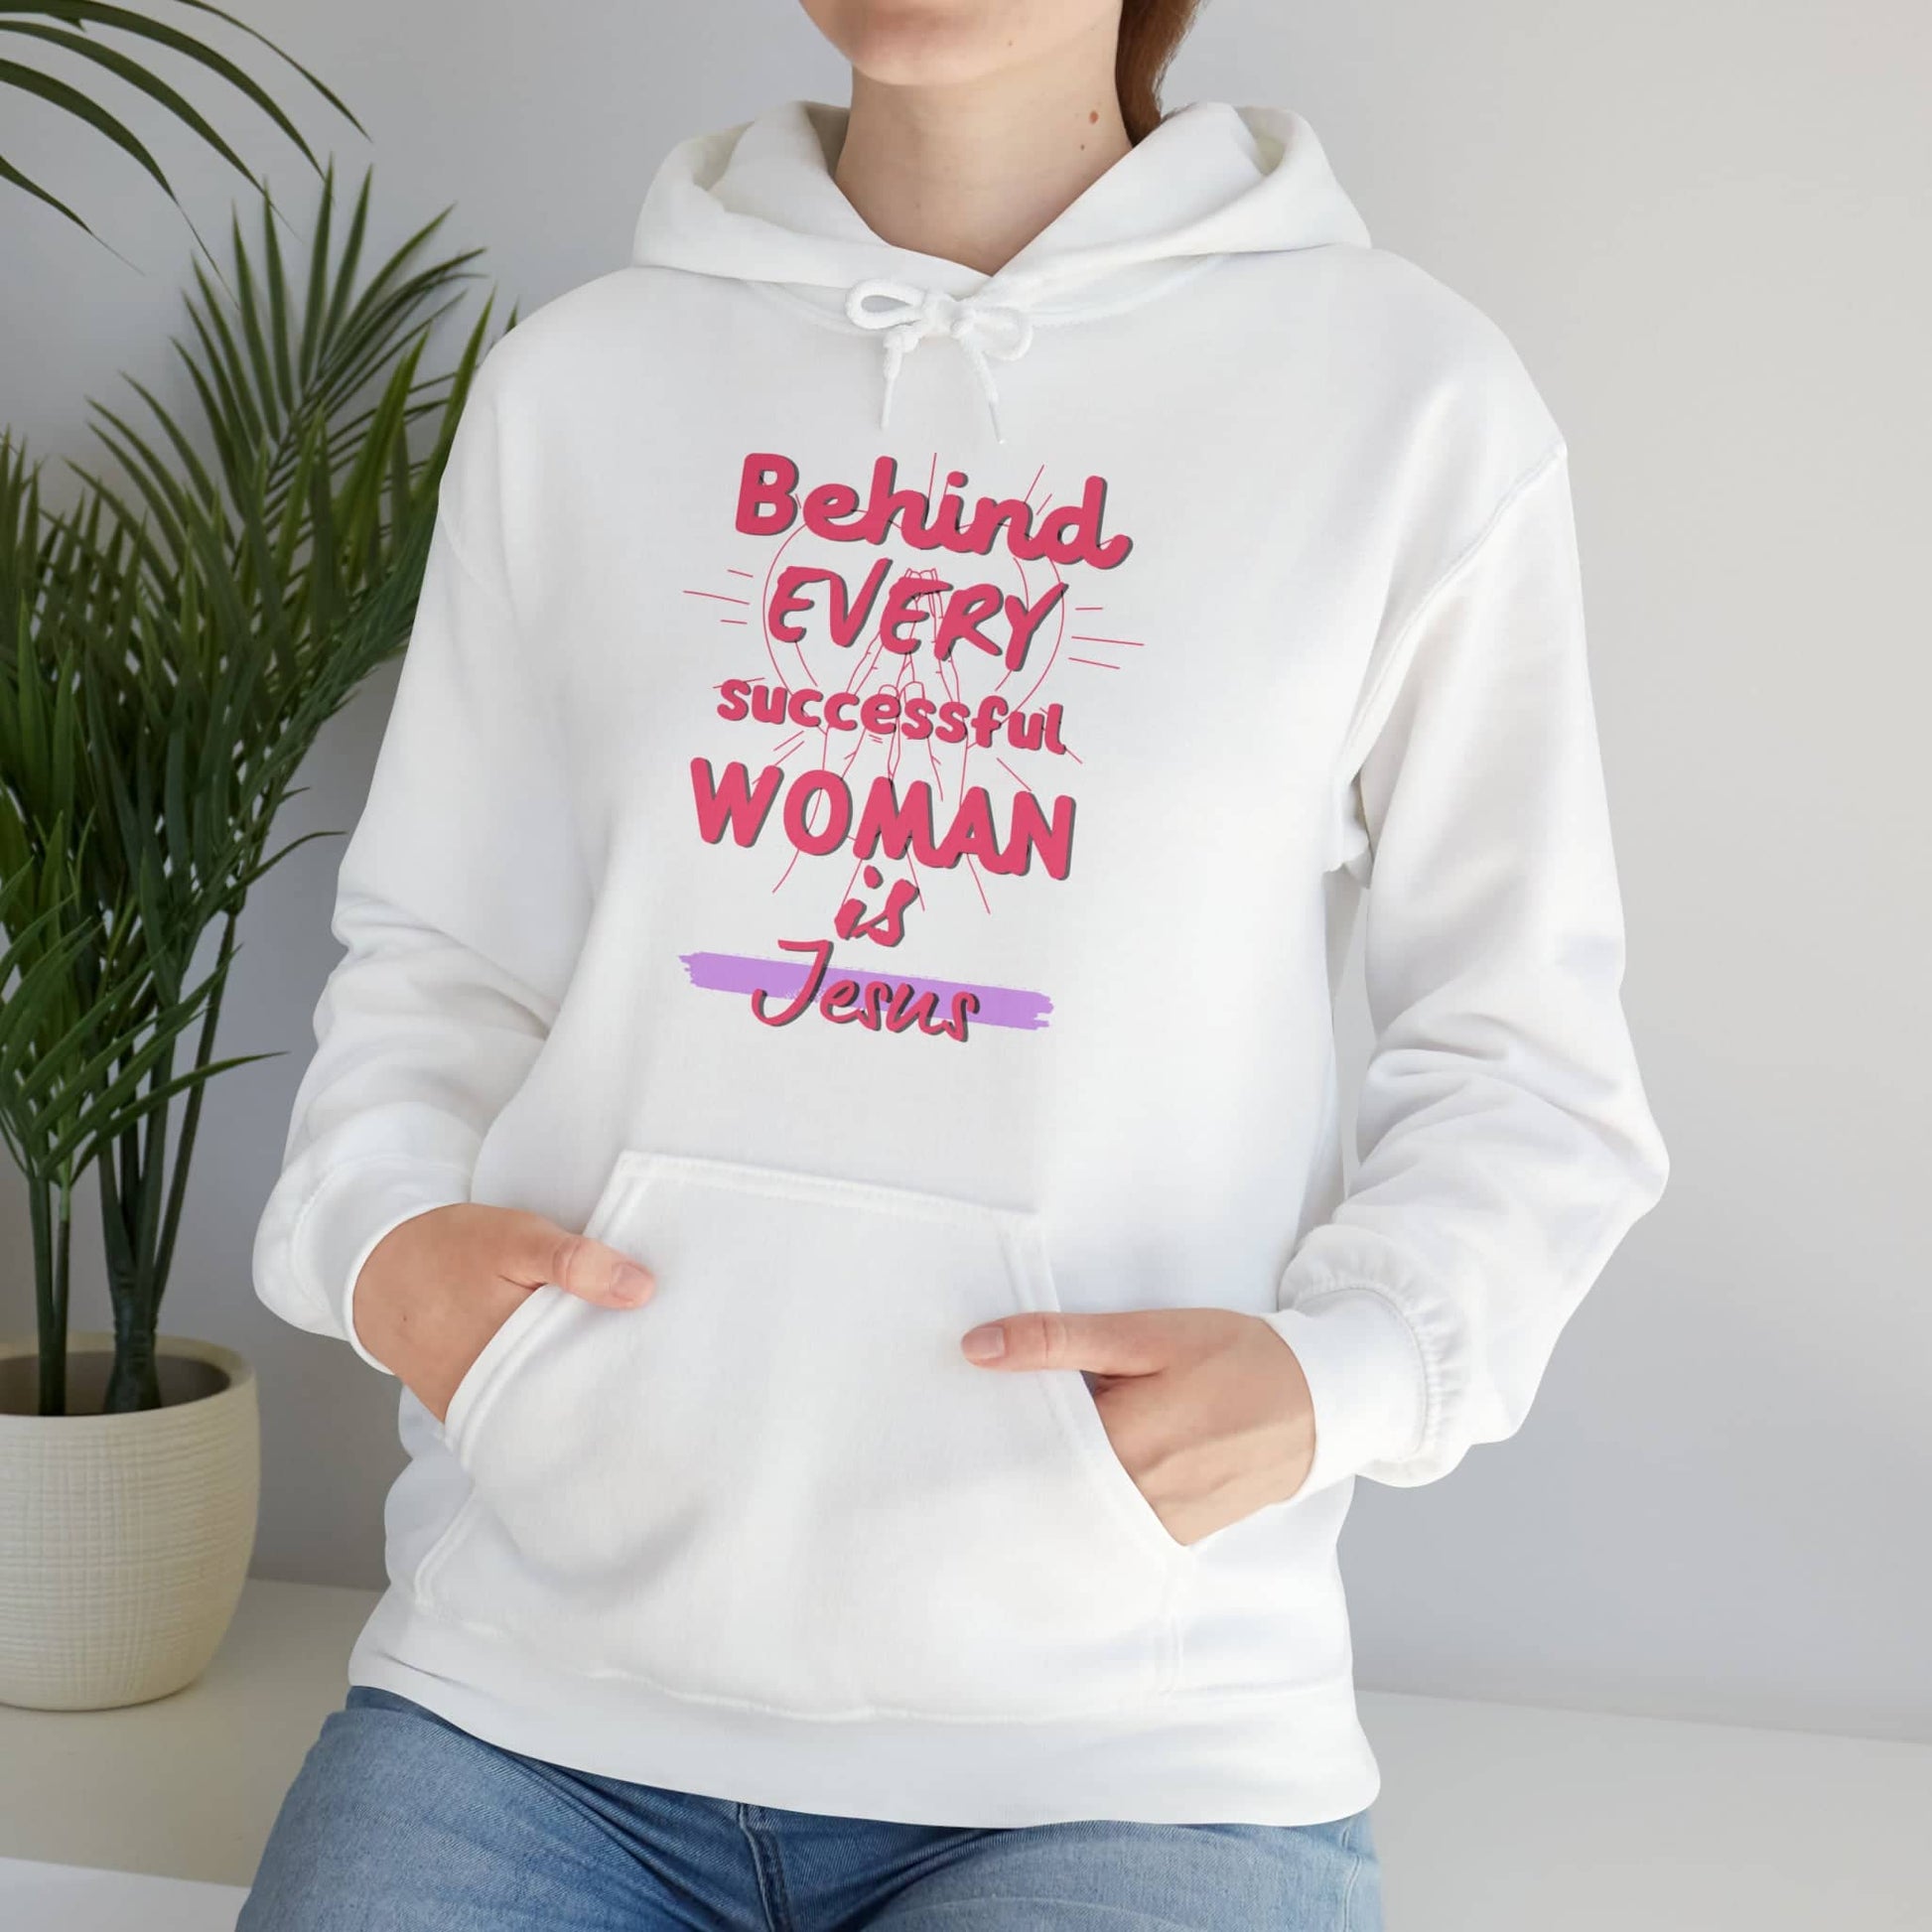 Successful Woman Christian' Unisex Hoodie Hoodie Bigger Than Life White S 